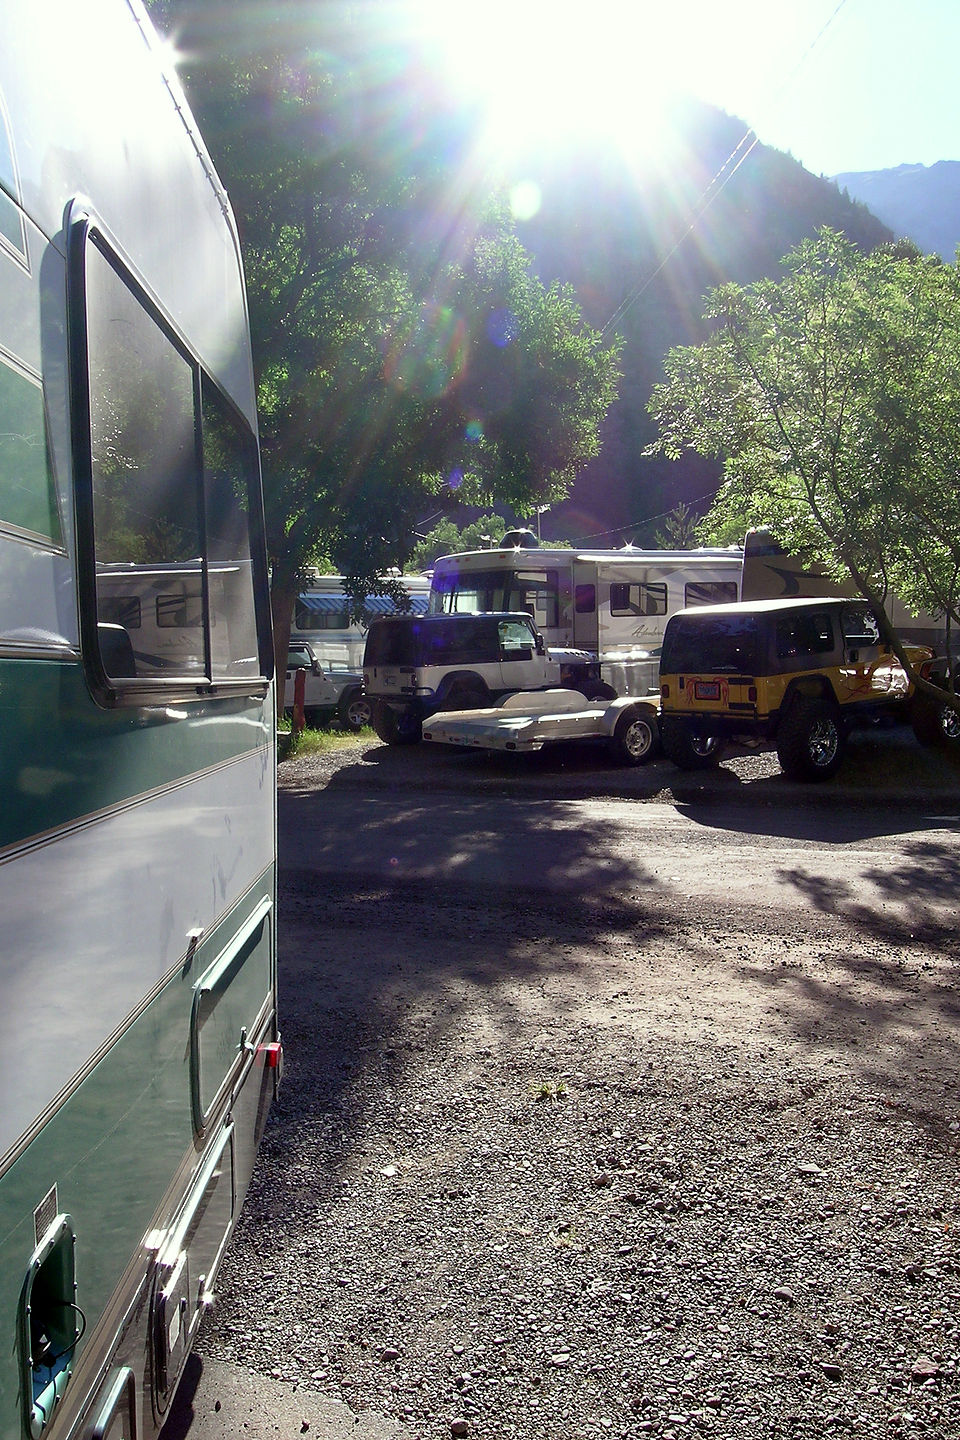 4J + 1 + 1 Campground in Ouray